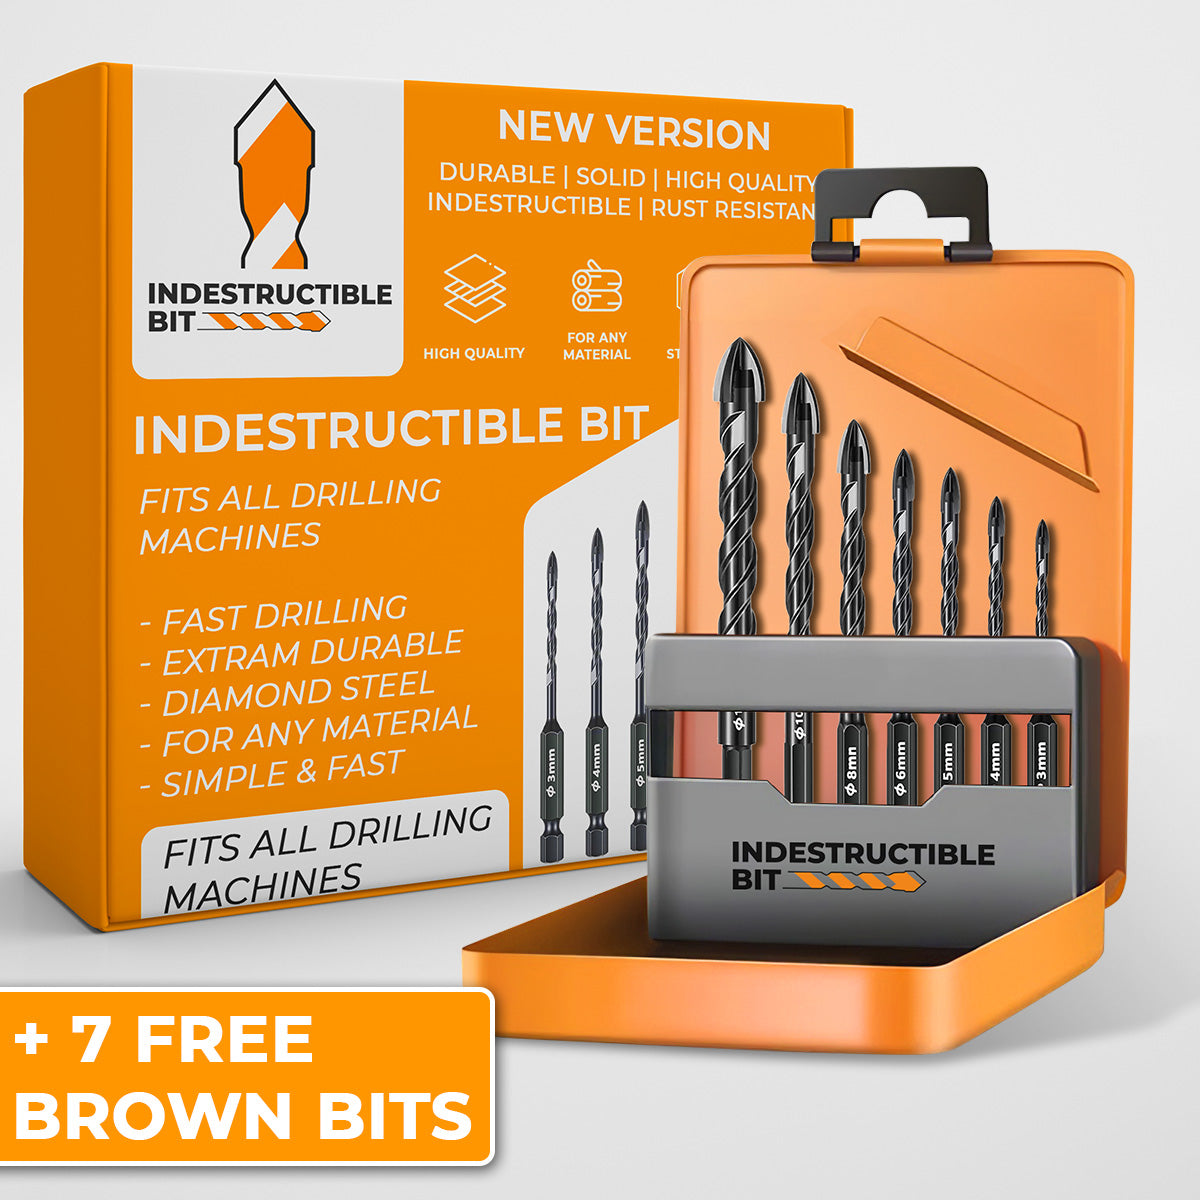 INDESTRUCTIBLE DRILLBITS™ 3.0 - Drill any material in seconds